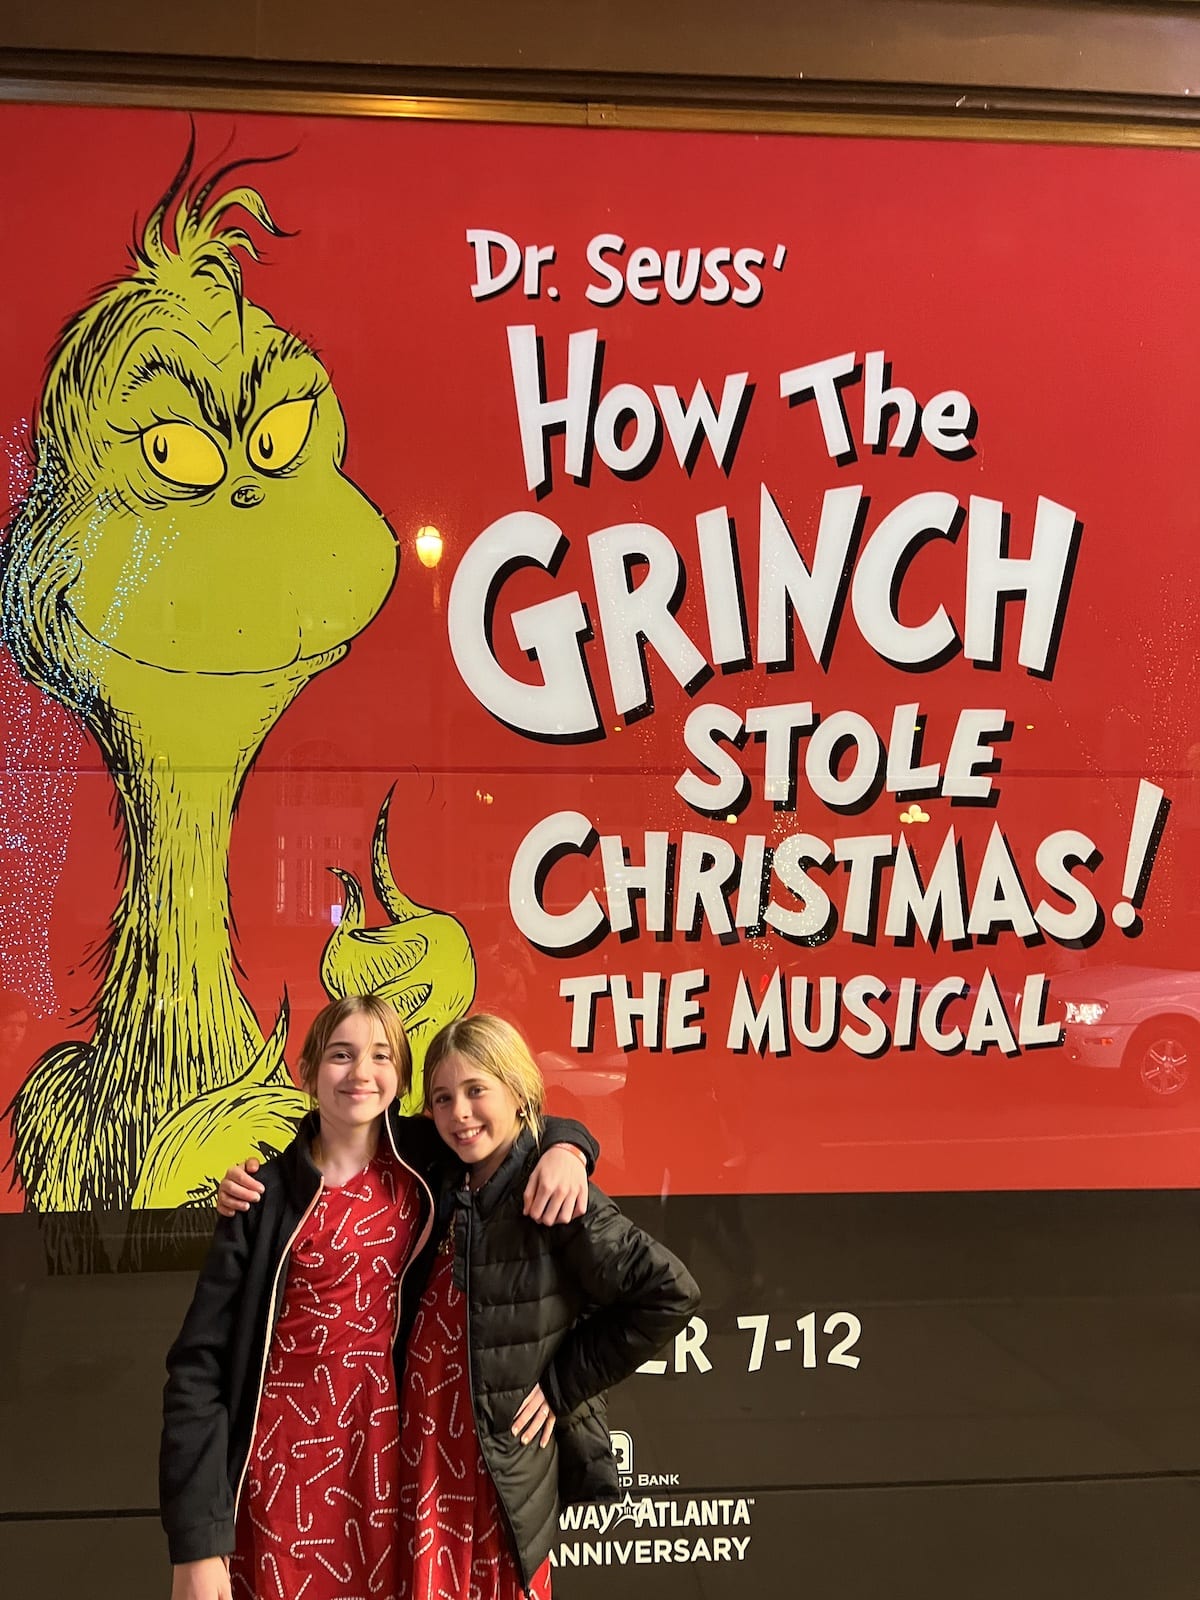 Dr. Seuss How the Grinch Stole Christmas The Musical What to Expect at the holiday festive show! Our girl's night in Atlanta